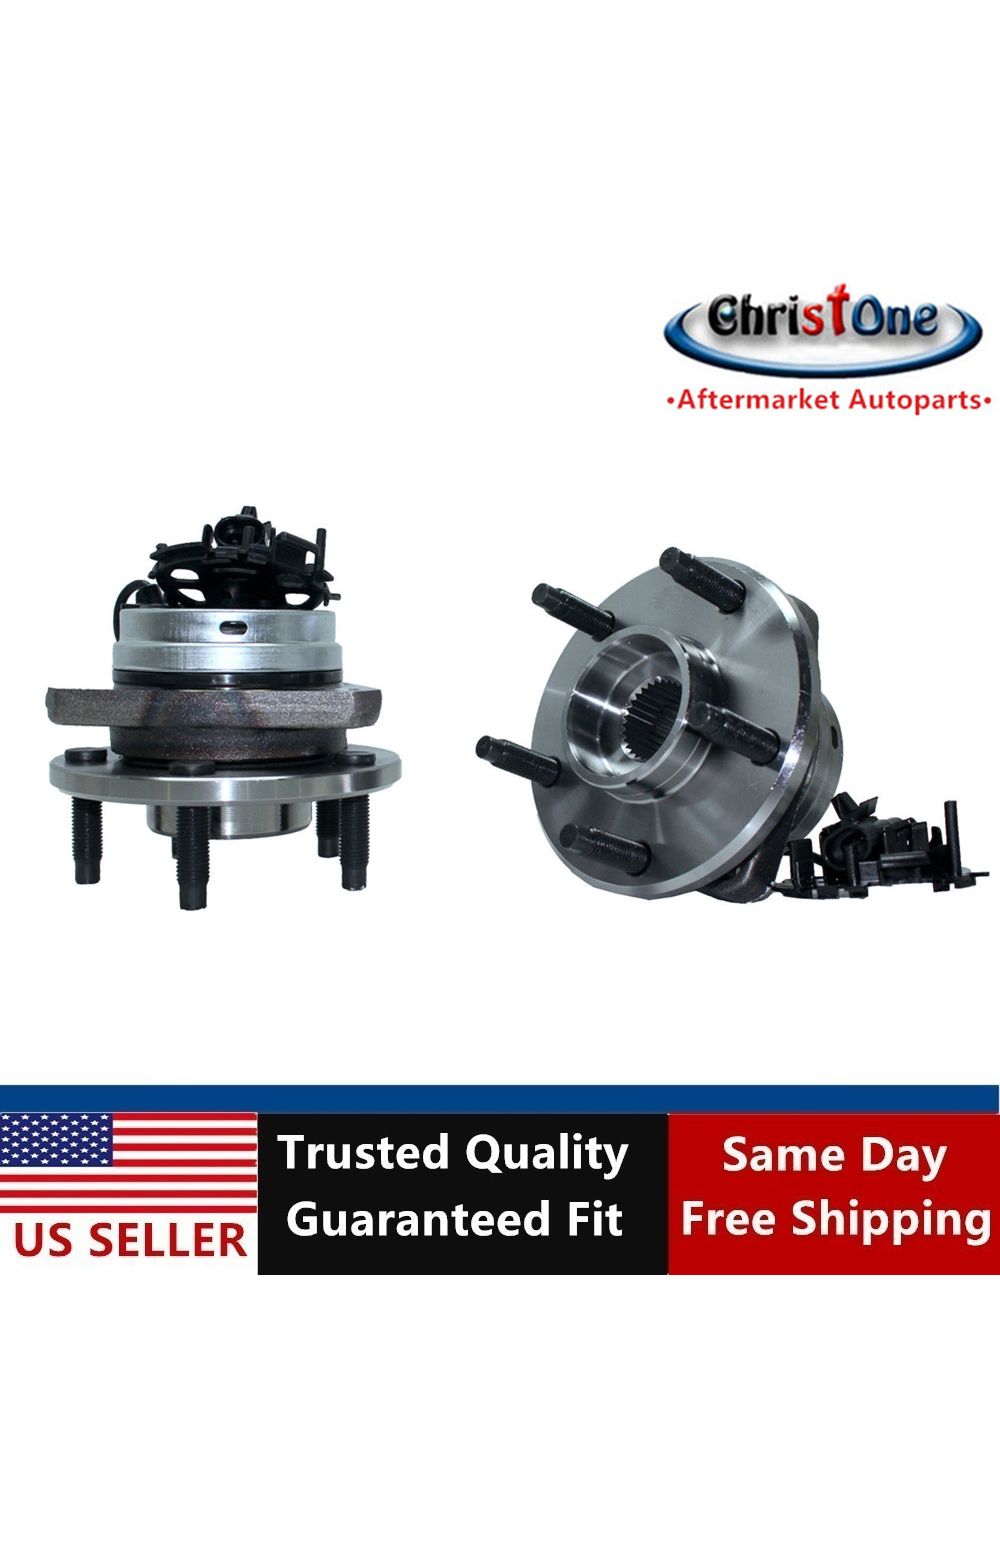 BOXI Front Driver or Passenger Side Wheel Hub and Bearing Assembly 5 Lugs for Chevrolet Malibu 2004-2008 Pontiac G6 2005-2007 Non-ABS MODELS 513215 